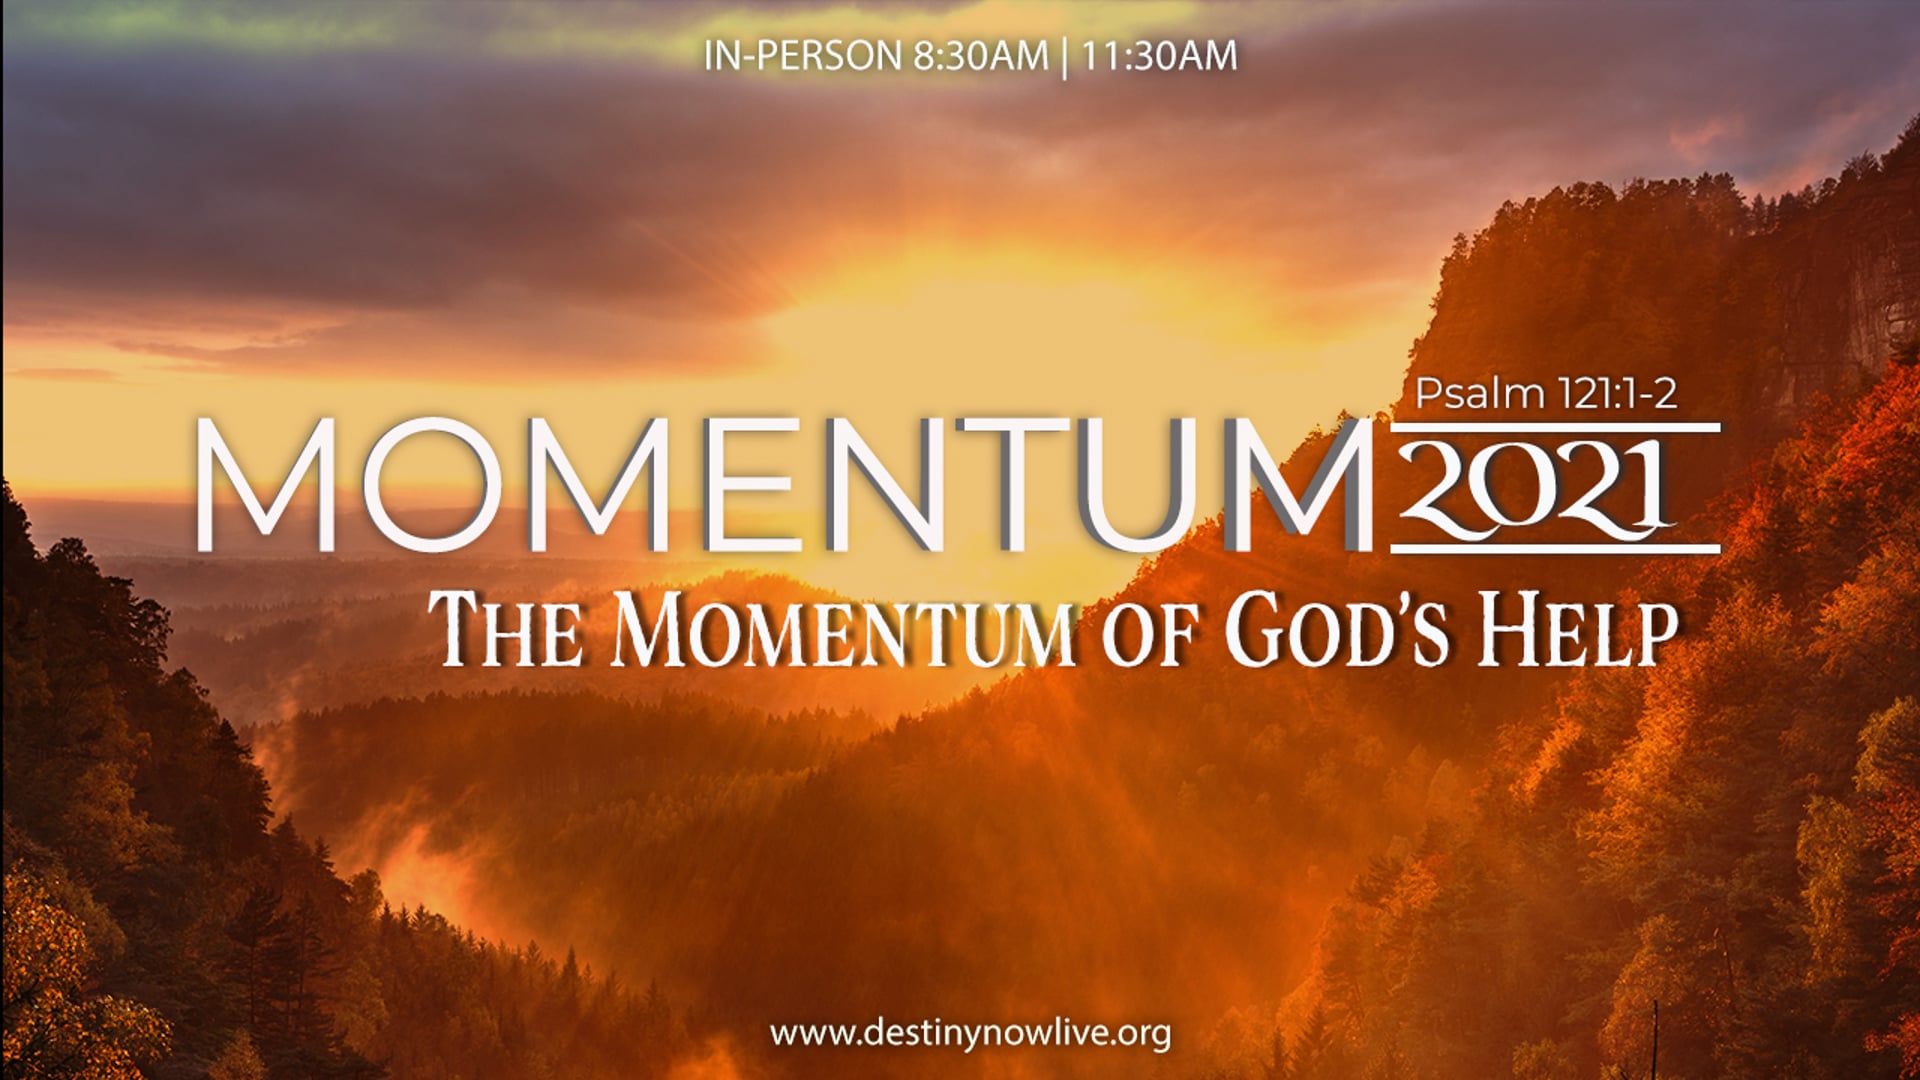 The Momentum of God's Help